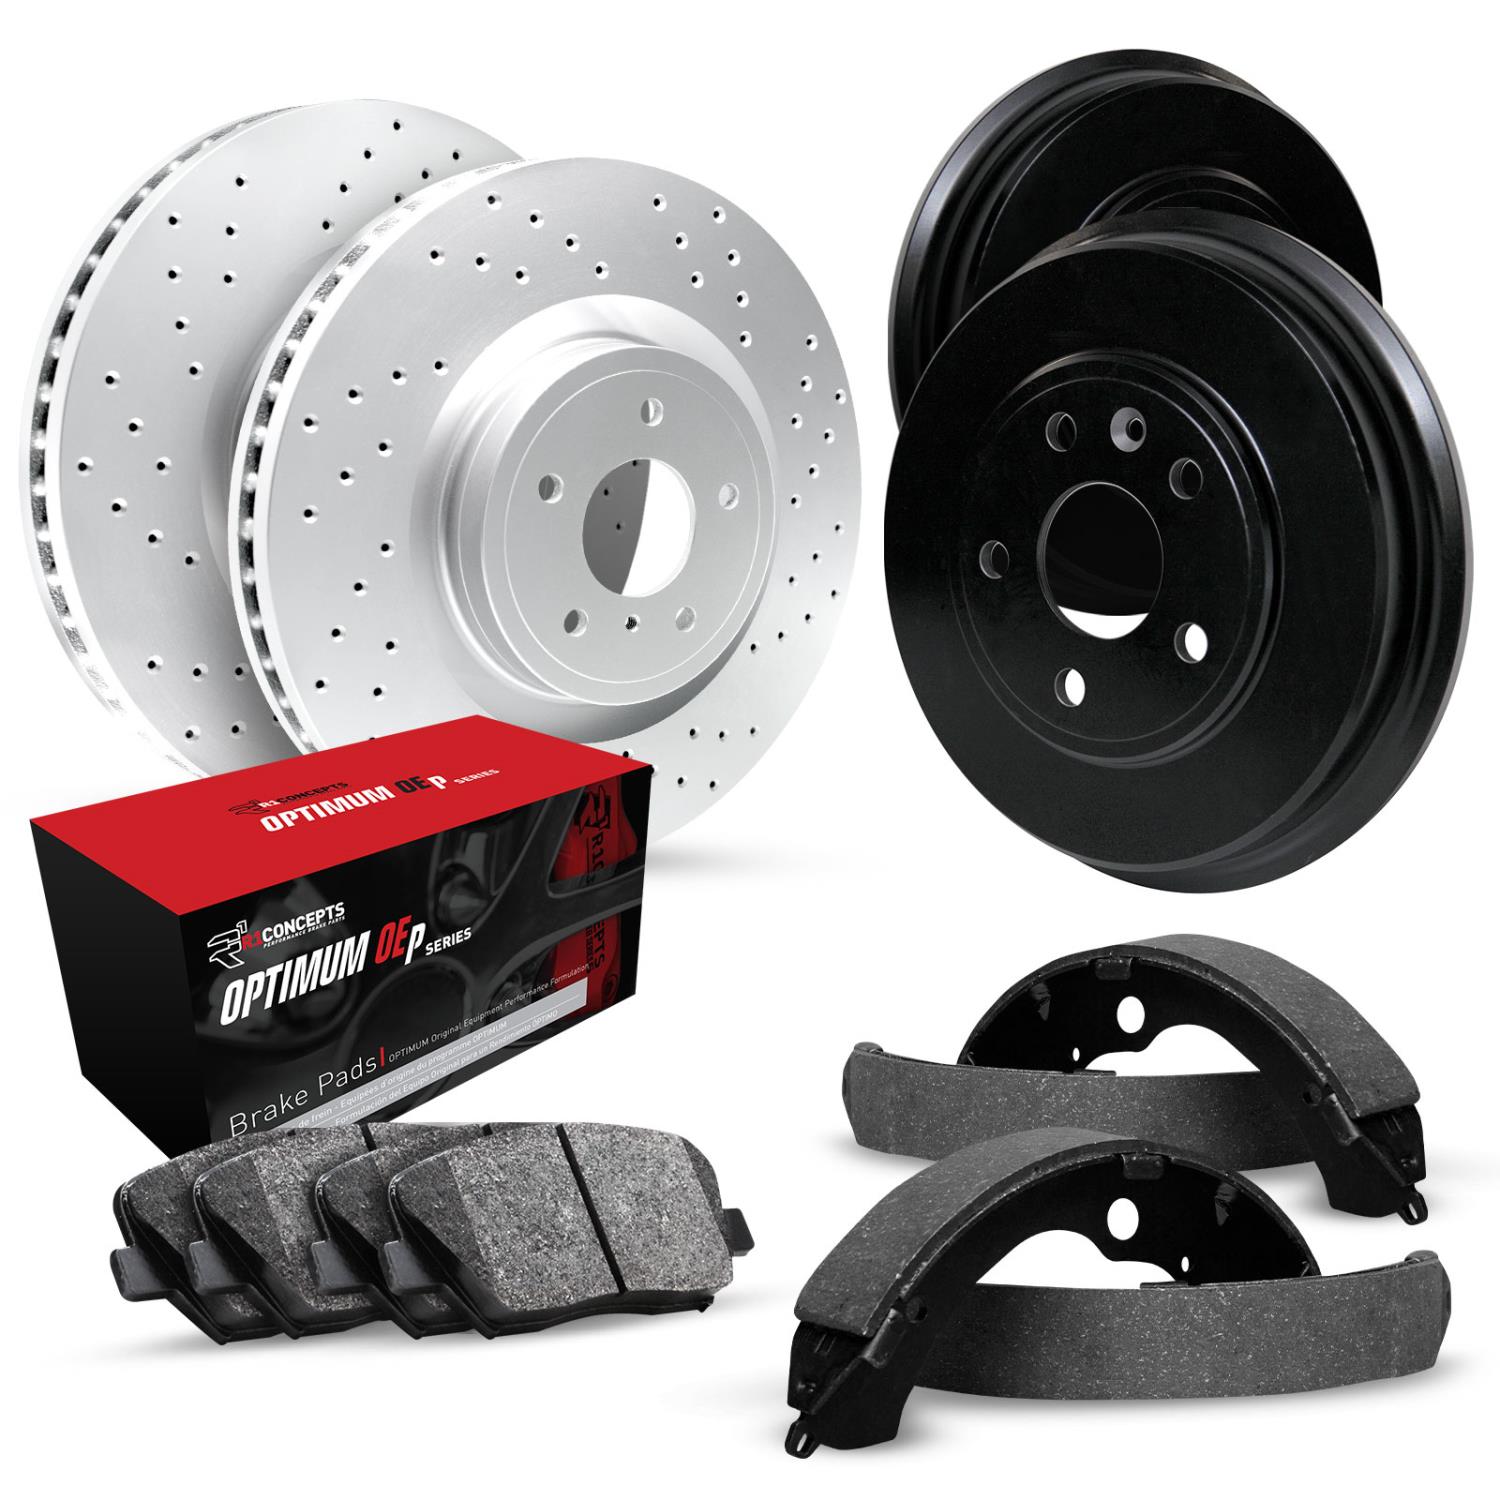 GEO-Carbon Drilled Brake Rotor & Drum Set w/Optimum OE Pads & Shoes, 1994-1997 GM, Position: Front & Rear